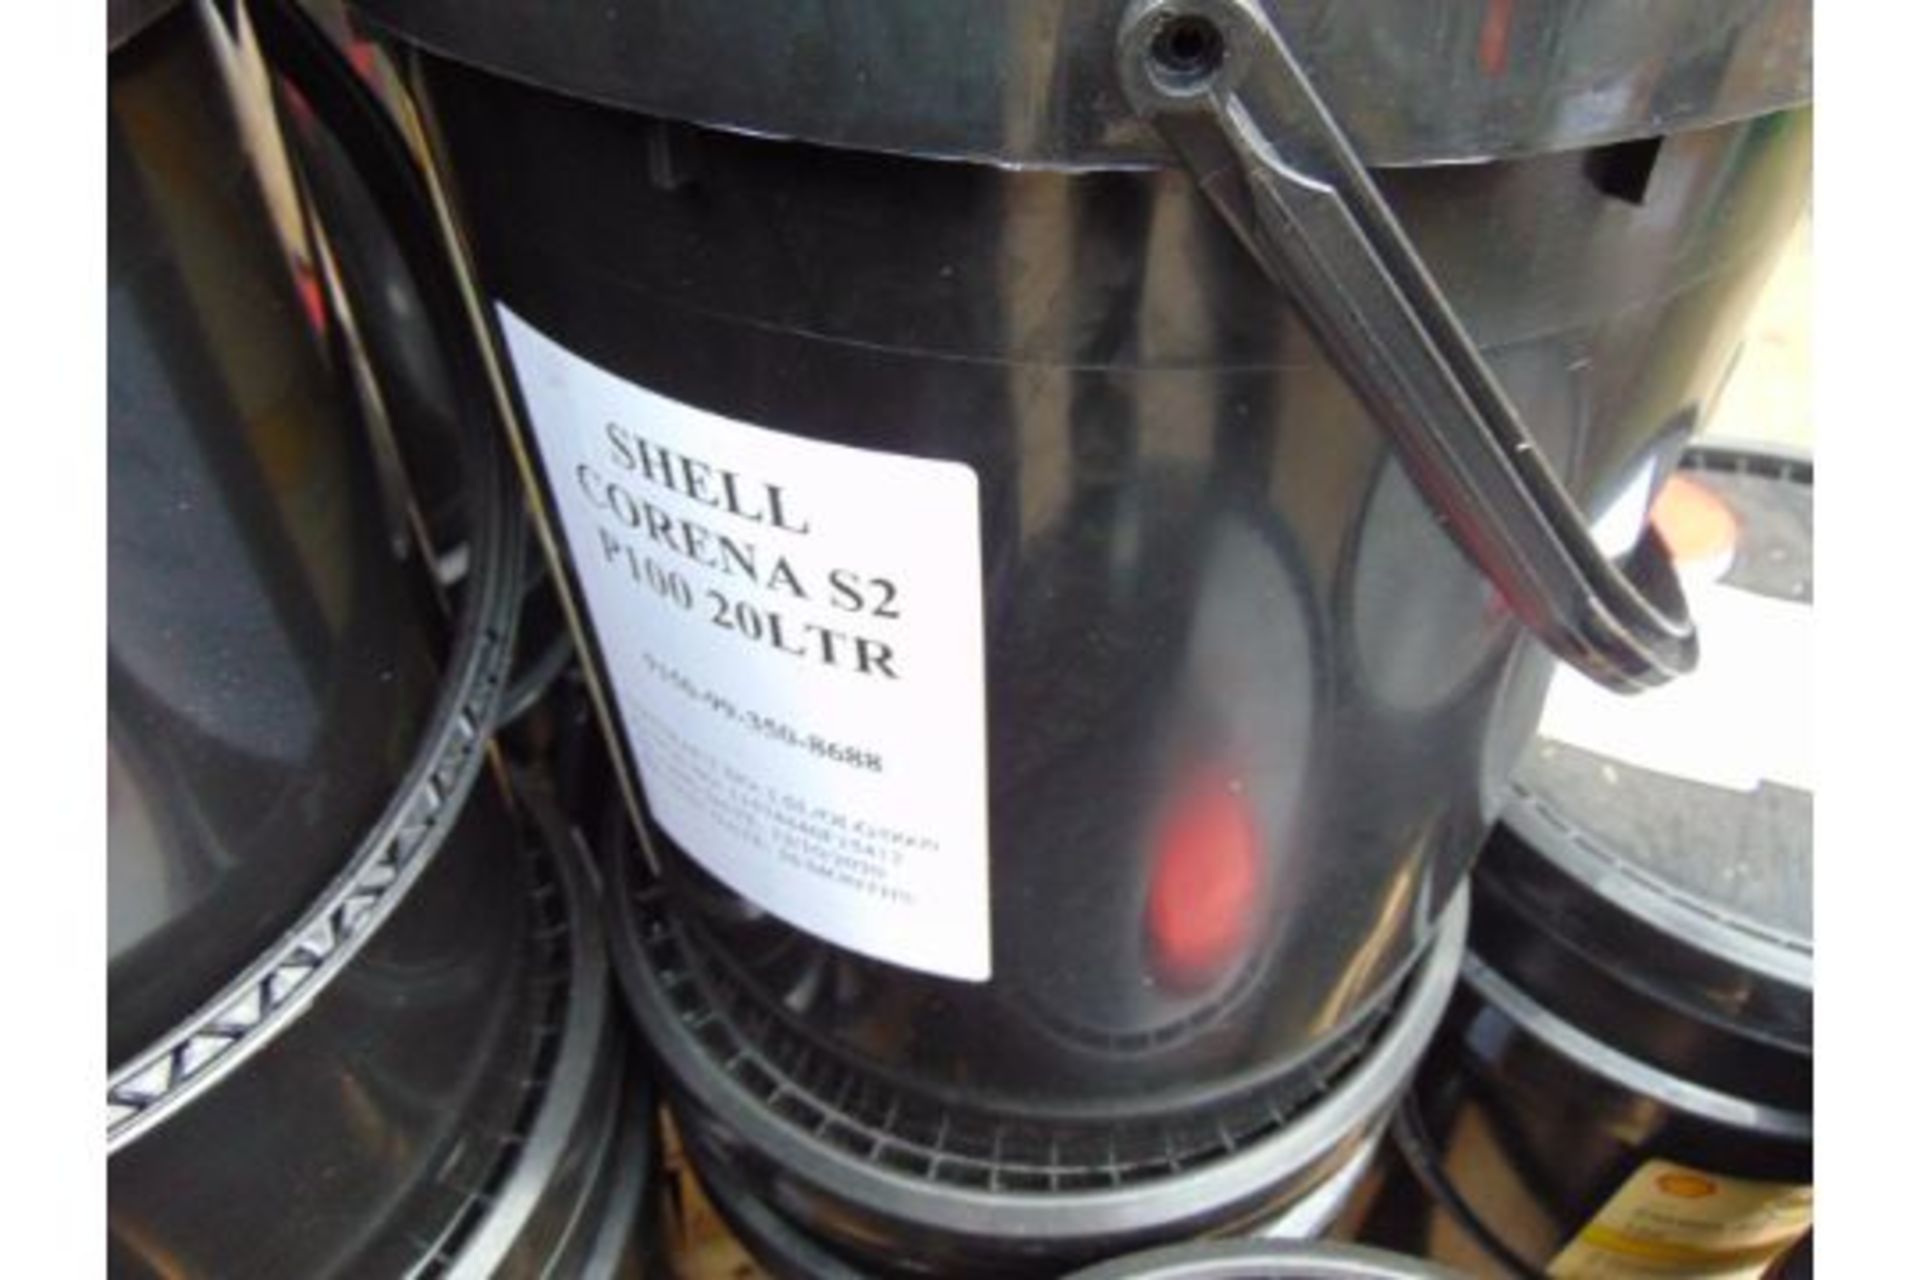 19 x 20 Litre Drums of Shell Corena S2 P100 High Quality Lubricating Oil - Image 4 of 5